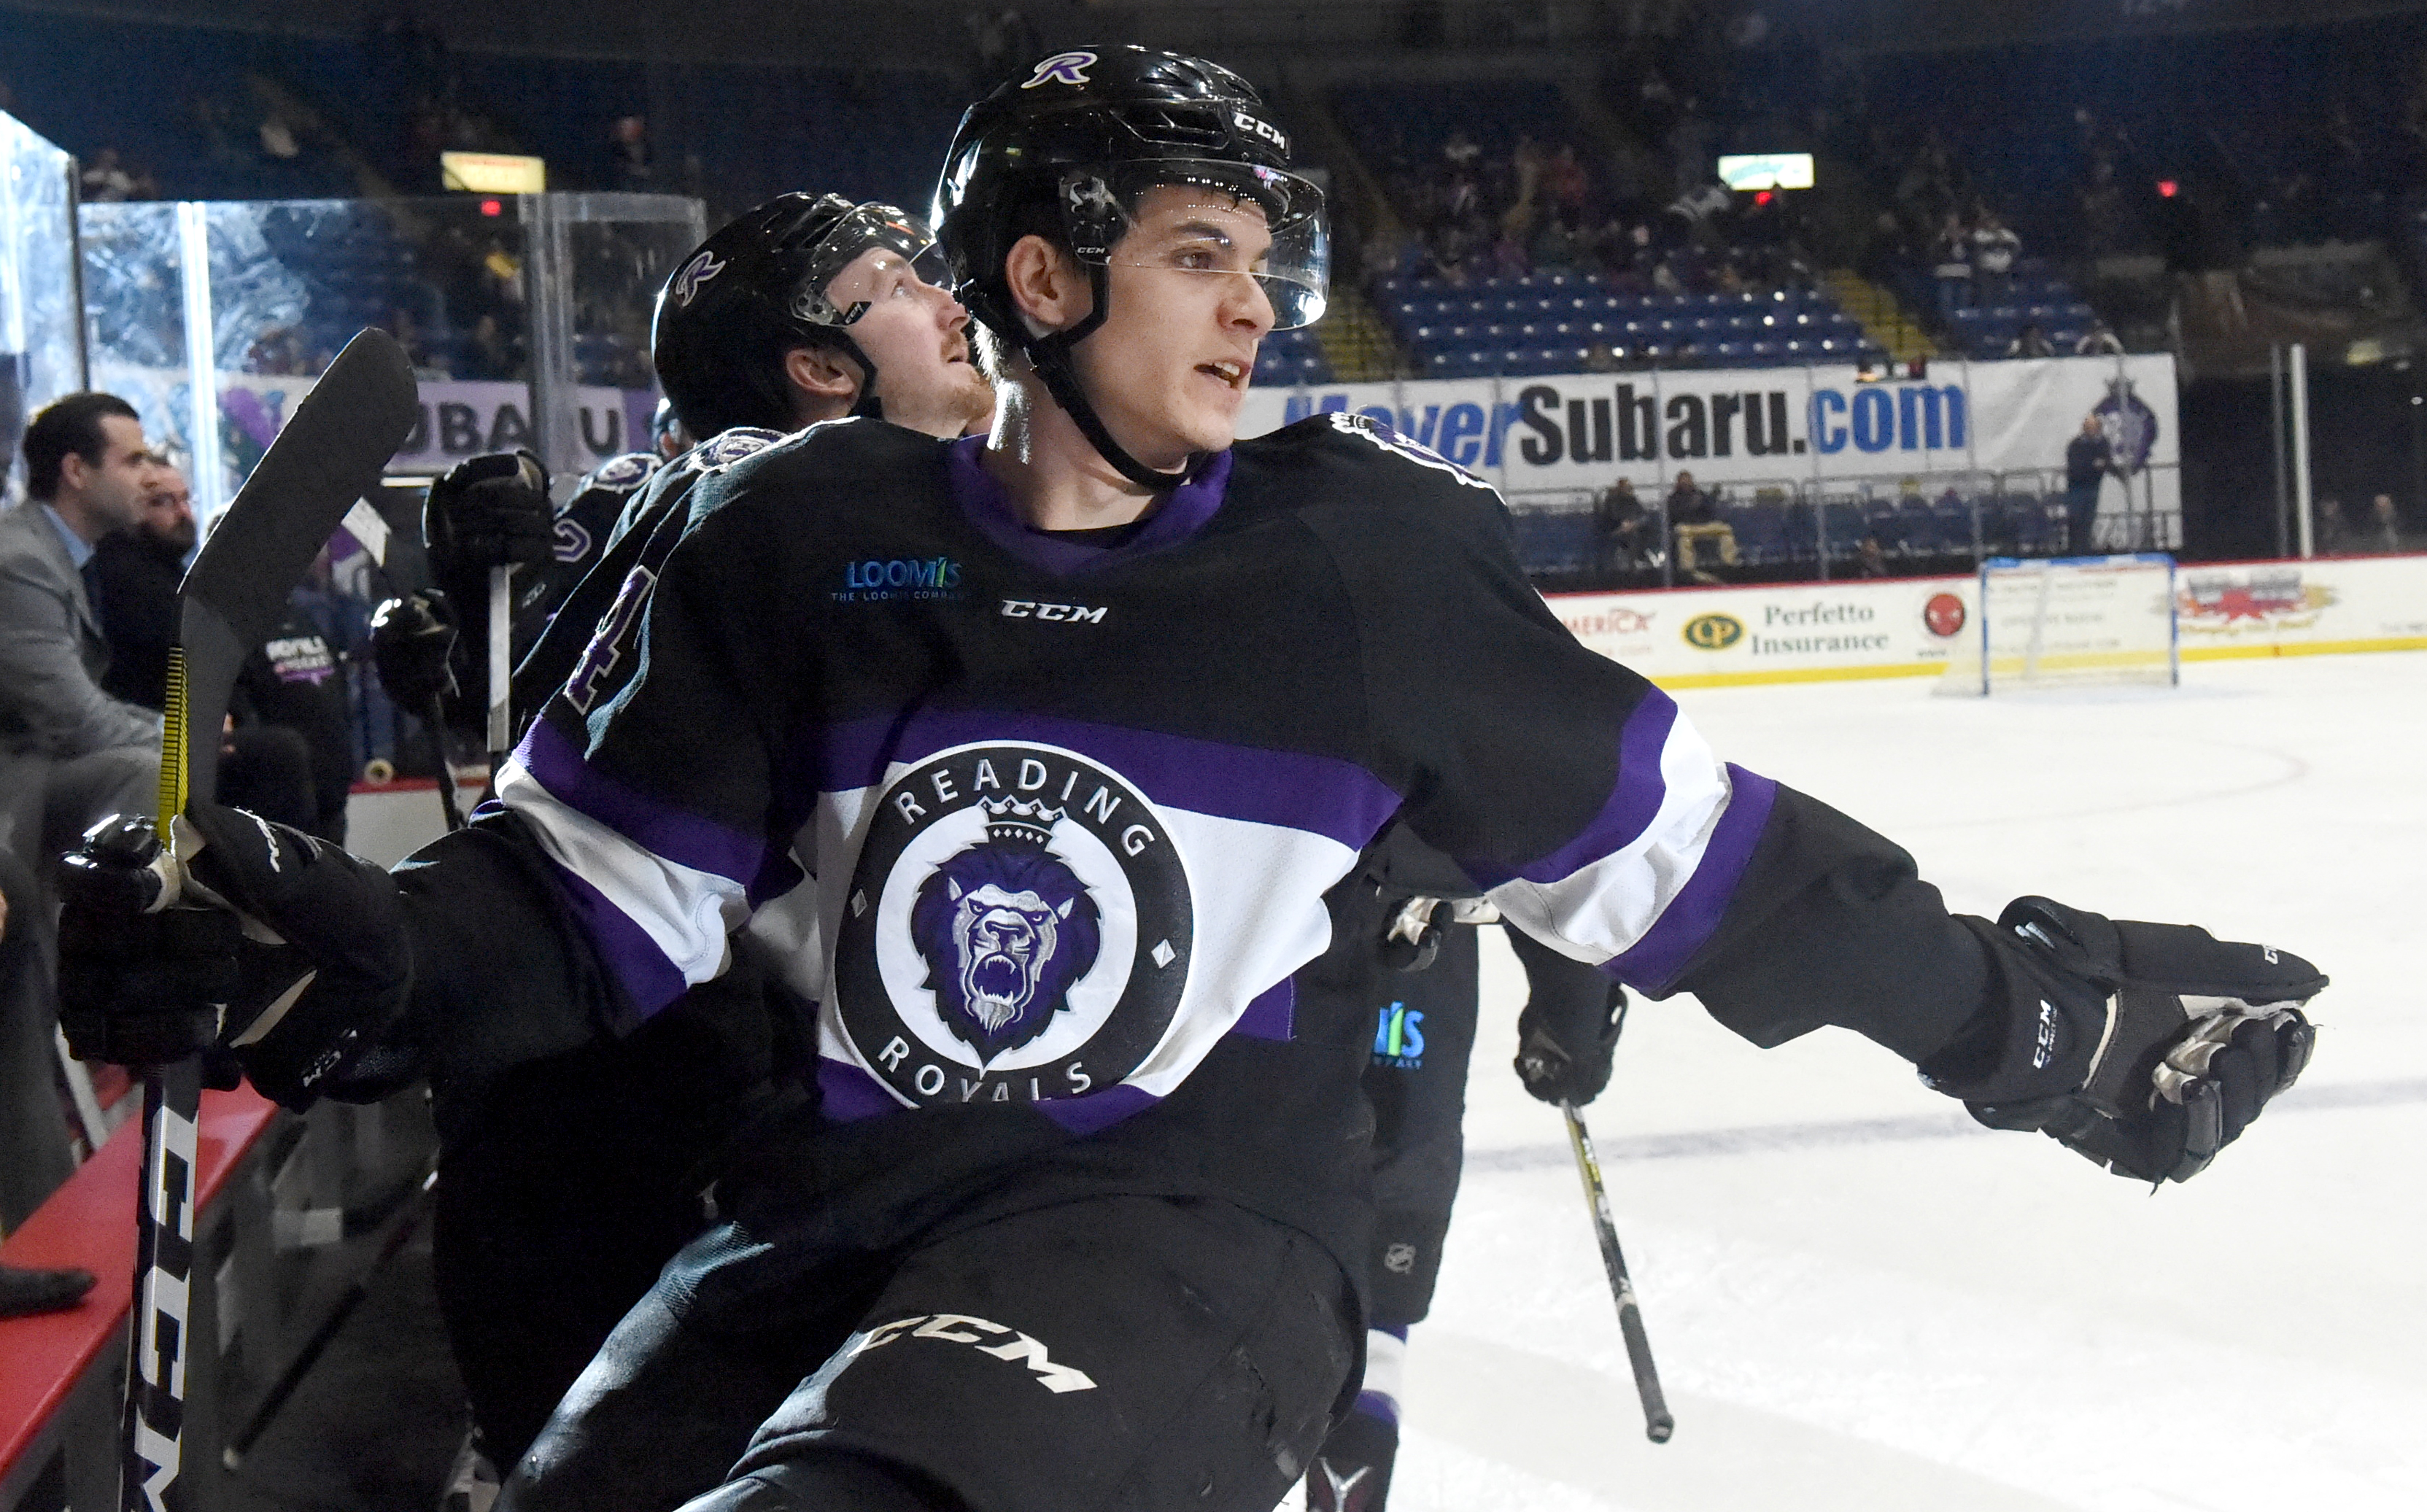 HOCKEY - Reading forward Mike Pereira (14) offers congratulations on Justin Crandall’s goal. HOCKEY - The Reading Royals were defeated by the South Carolina Stingrays 5-4 at the Santander Arena. HOCKEY Royals vs Stingrays Photo by Harold